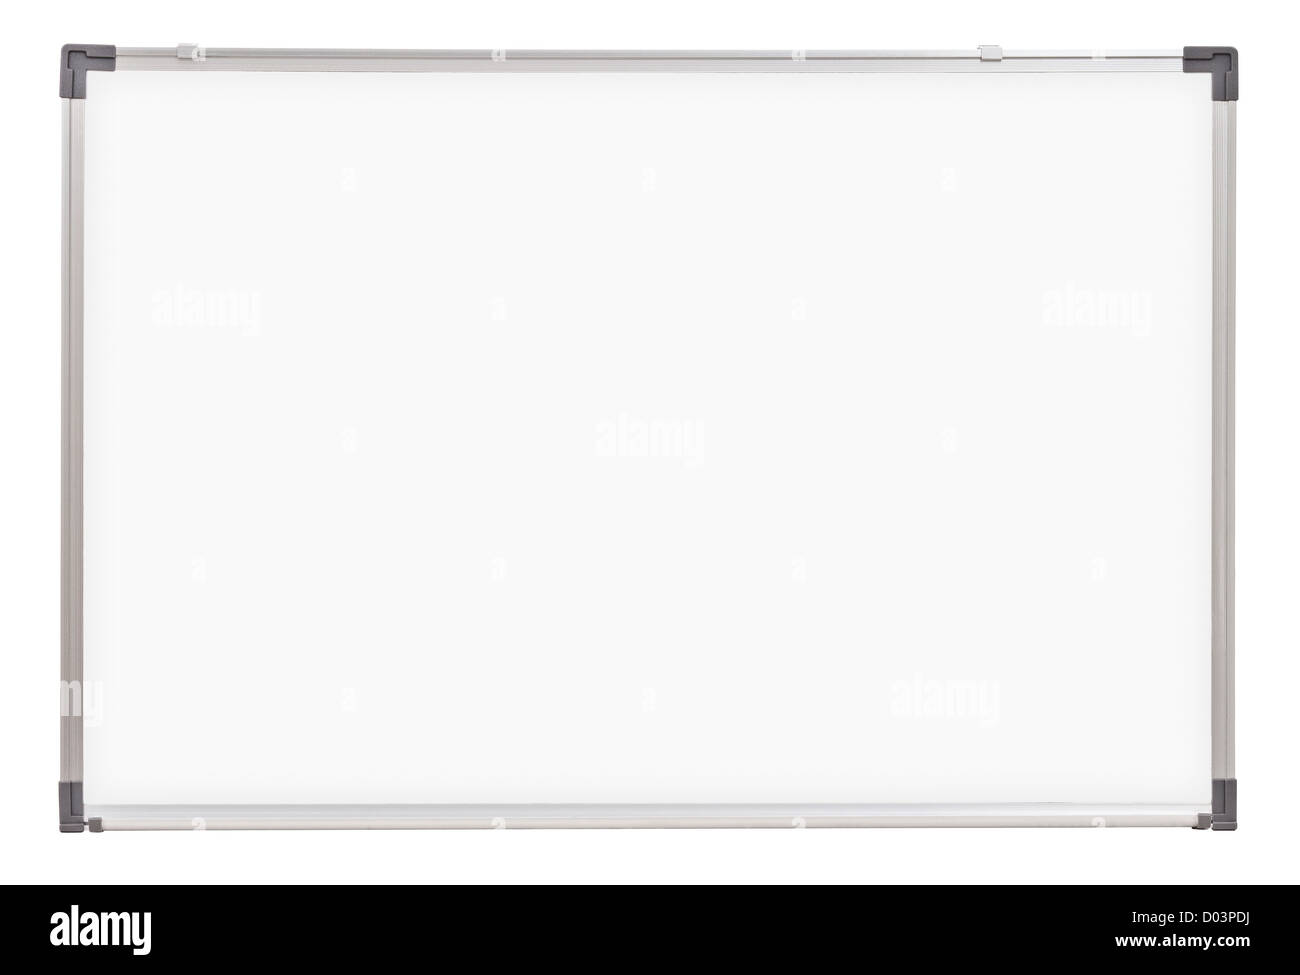 school whiteboard or board isolated on white Stock Photo